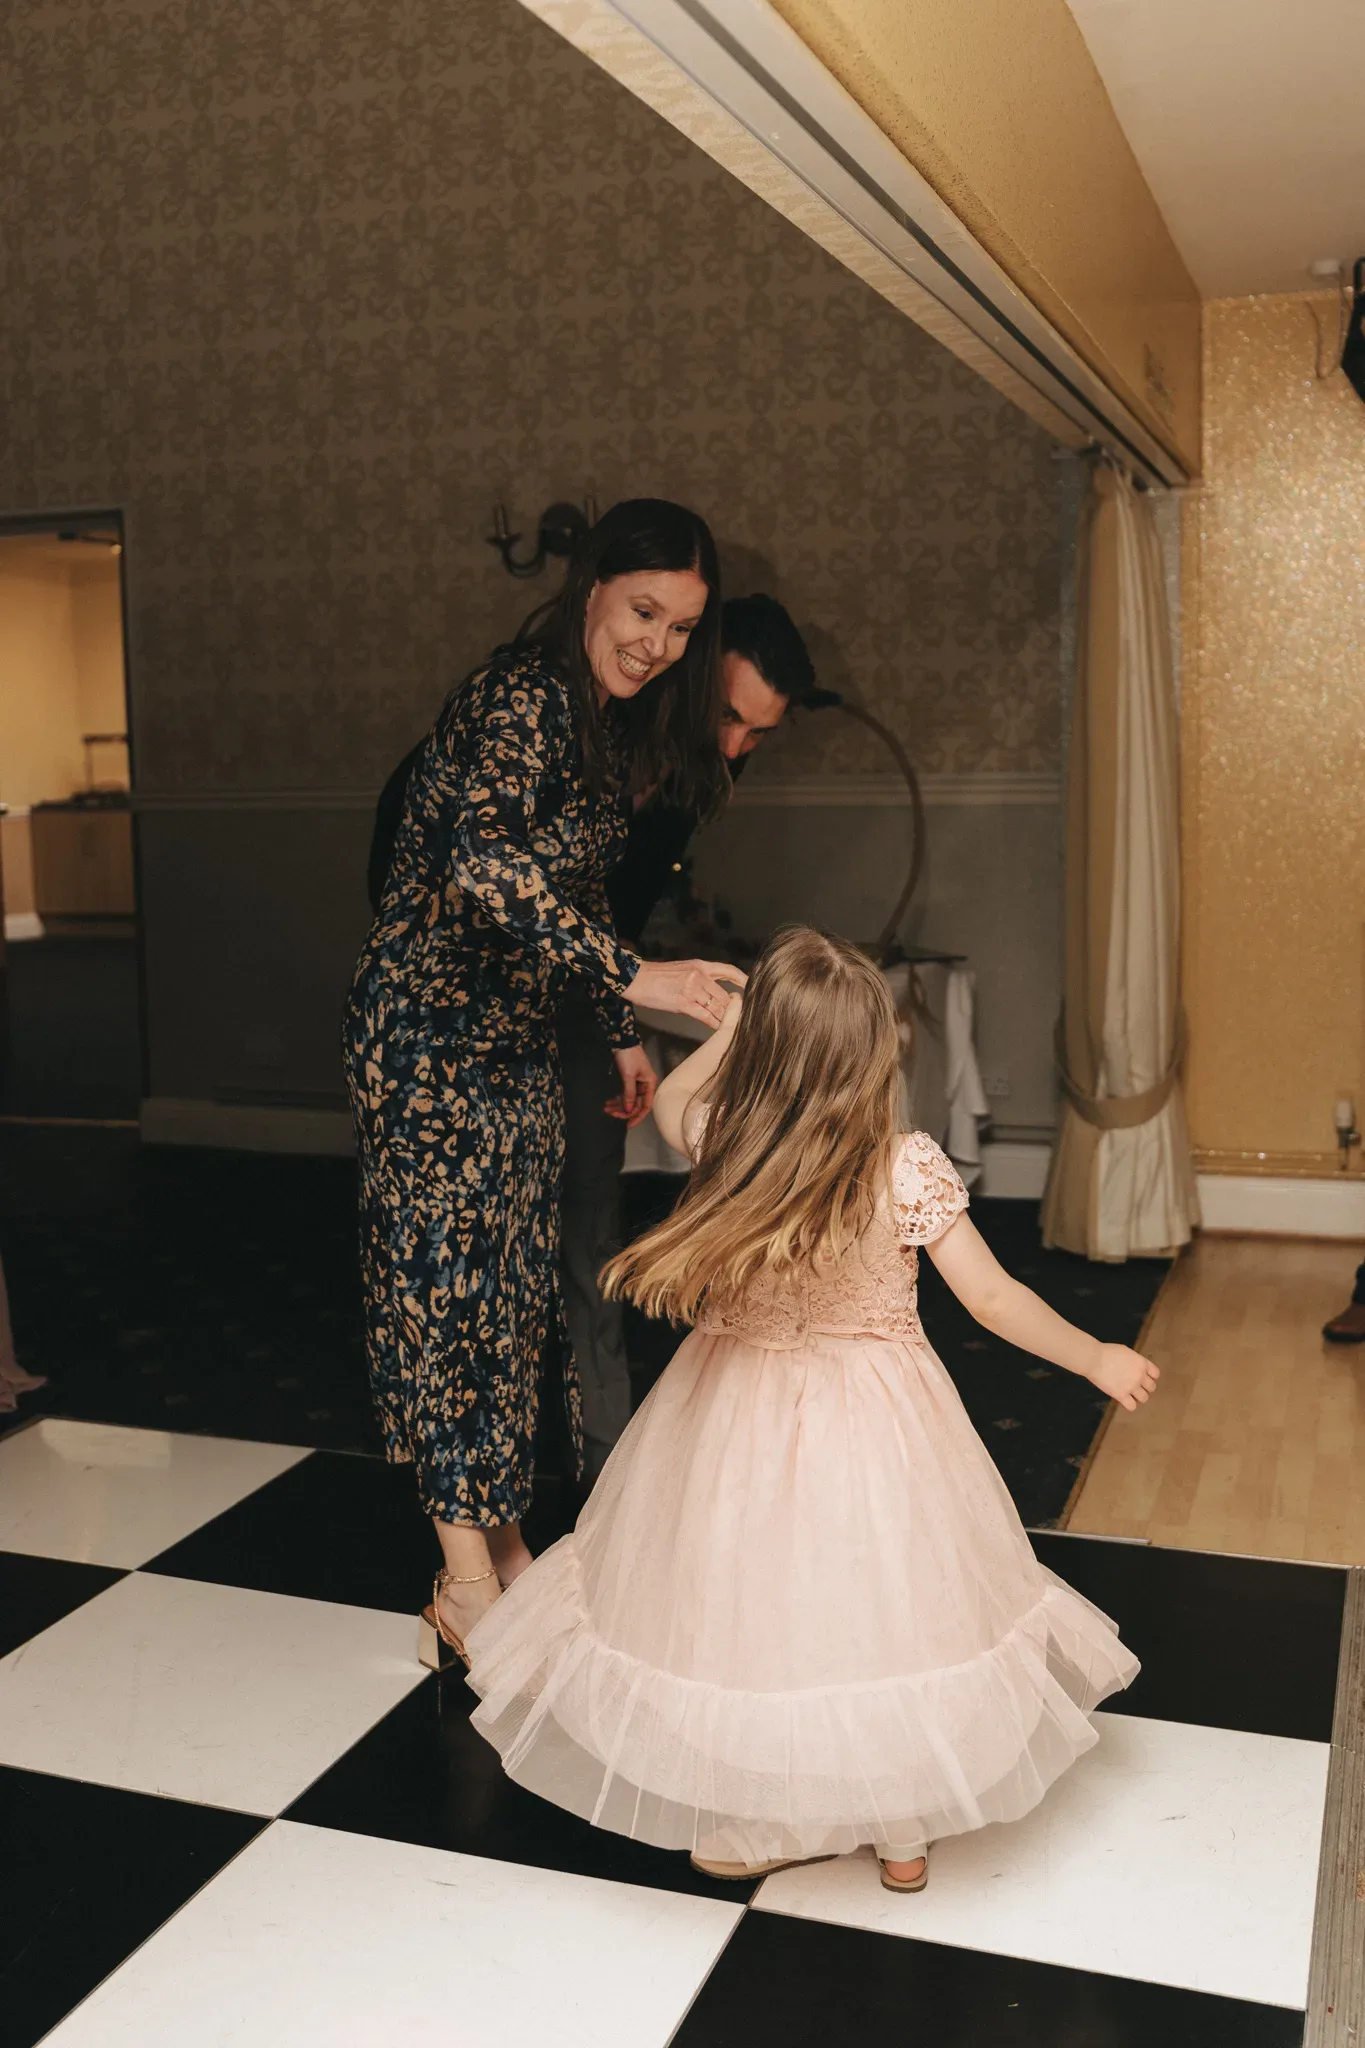 A woman in a floral dress and a man playfully dance with a young girl in a pink tutu on a black and white checkered floor, in a warmly lit room with vintage wallpaper. they are all smiling, creating a joyful, festive atmosphere.